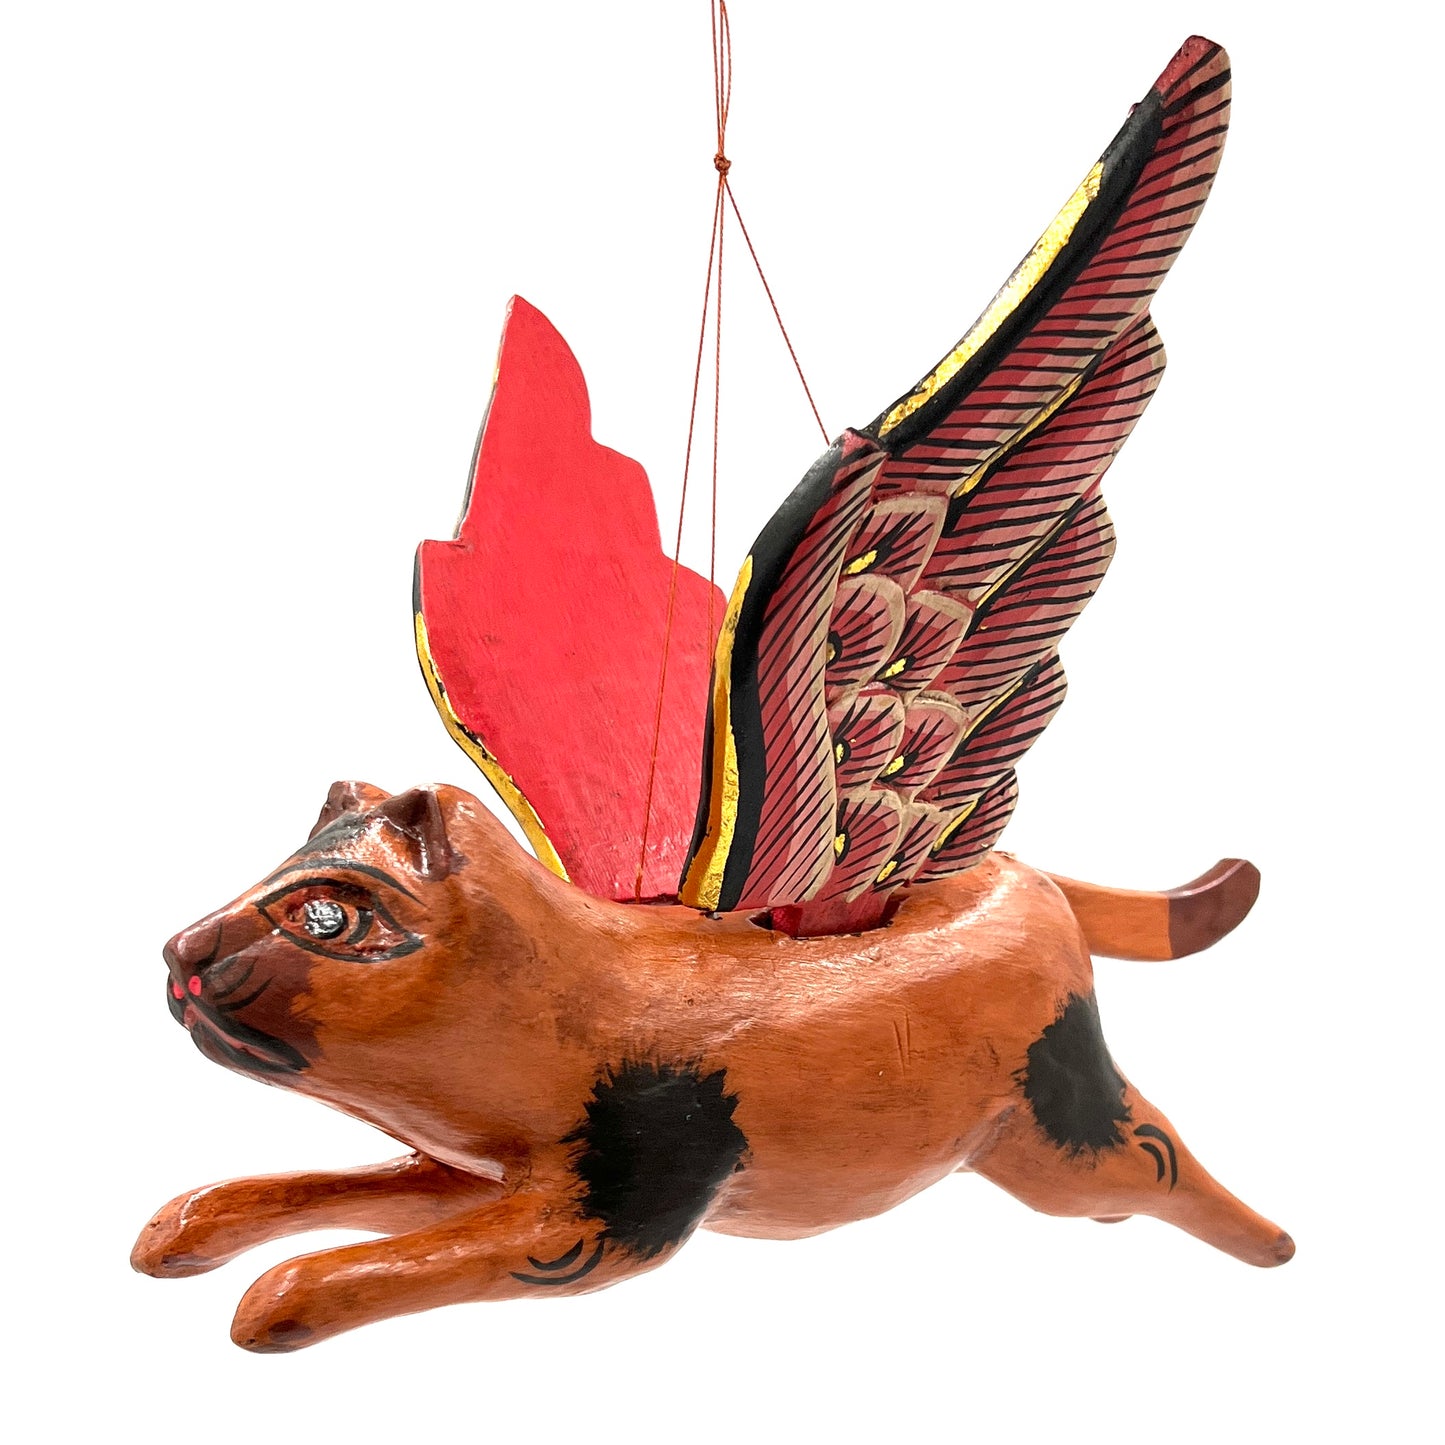 Hand Carved Flying Kitty Spirit chaser Orange & Brown Spotted